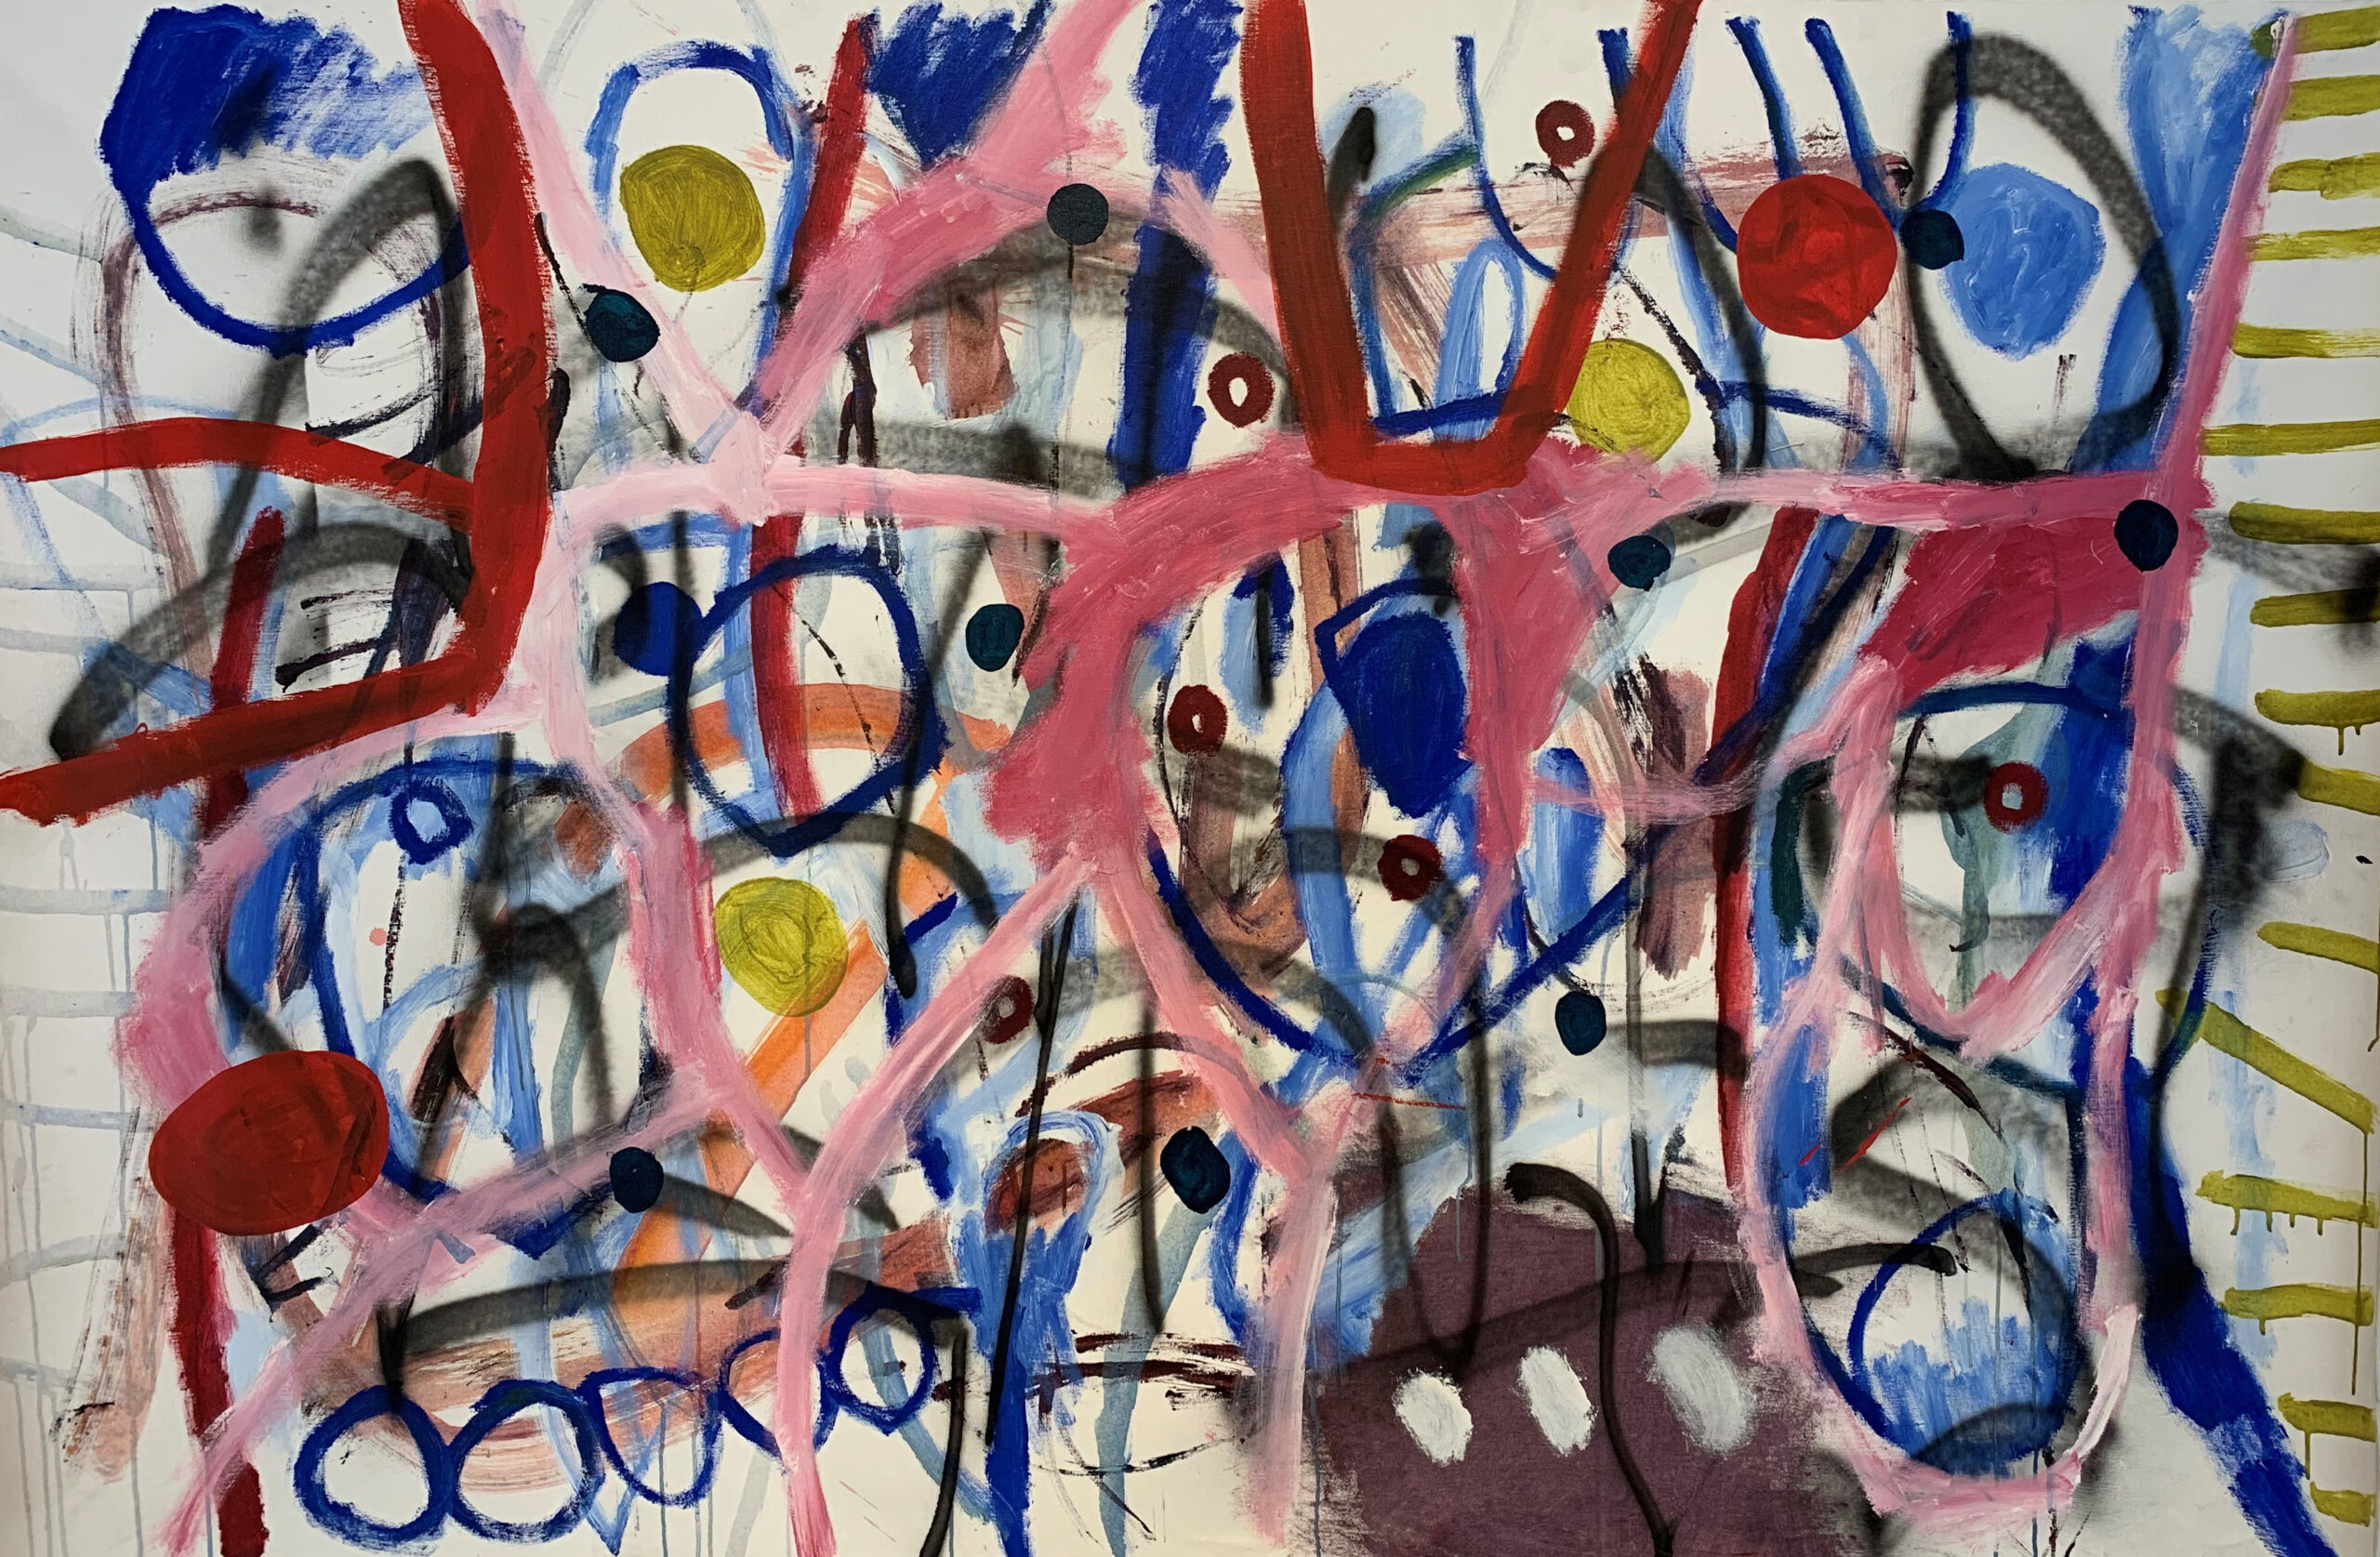 Al Poulet 'Untitled (OMFD)' acrylic and spray paint on canvas 126 x 200cm $9,000